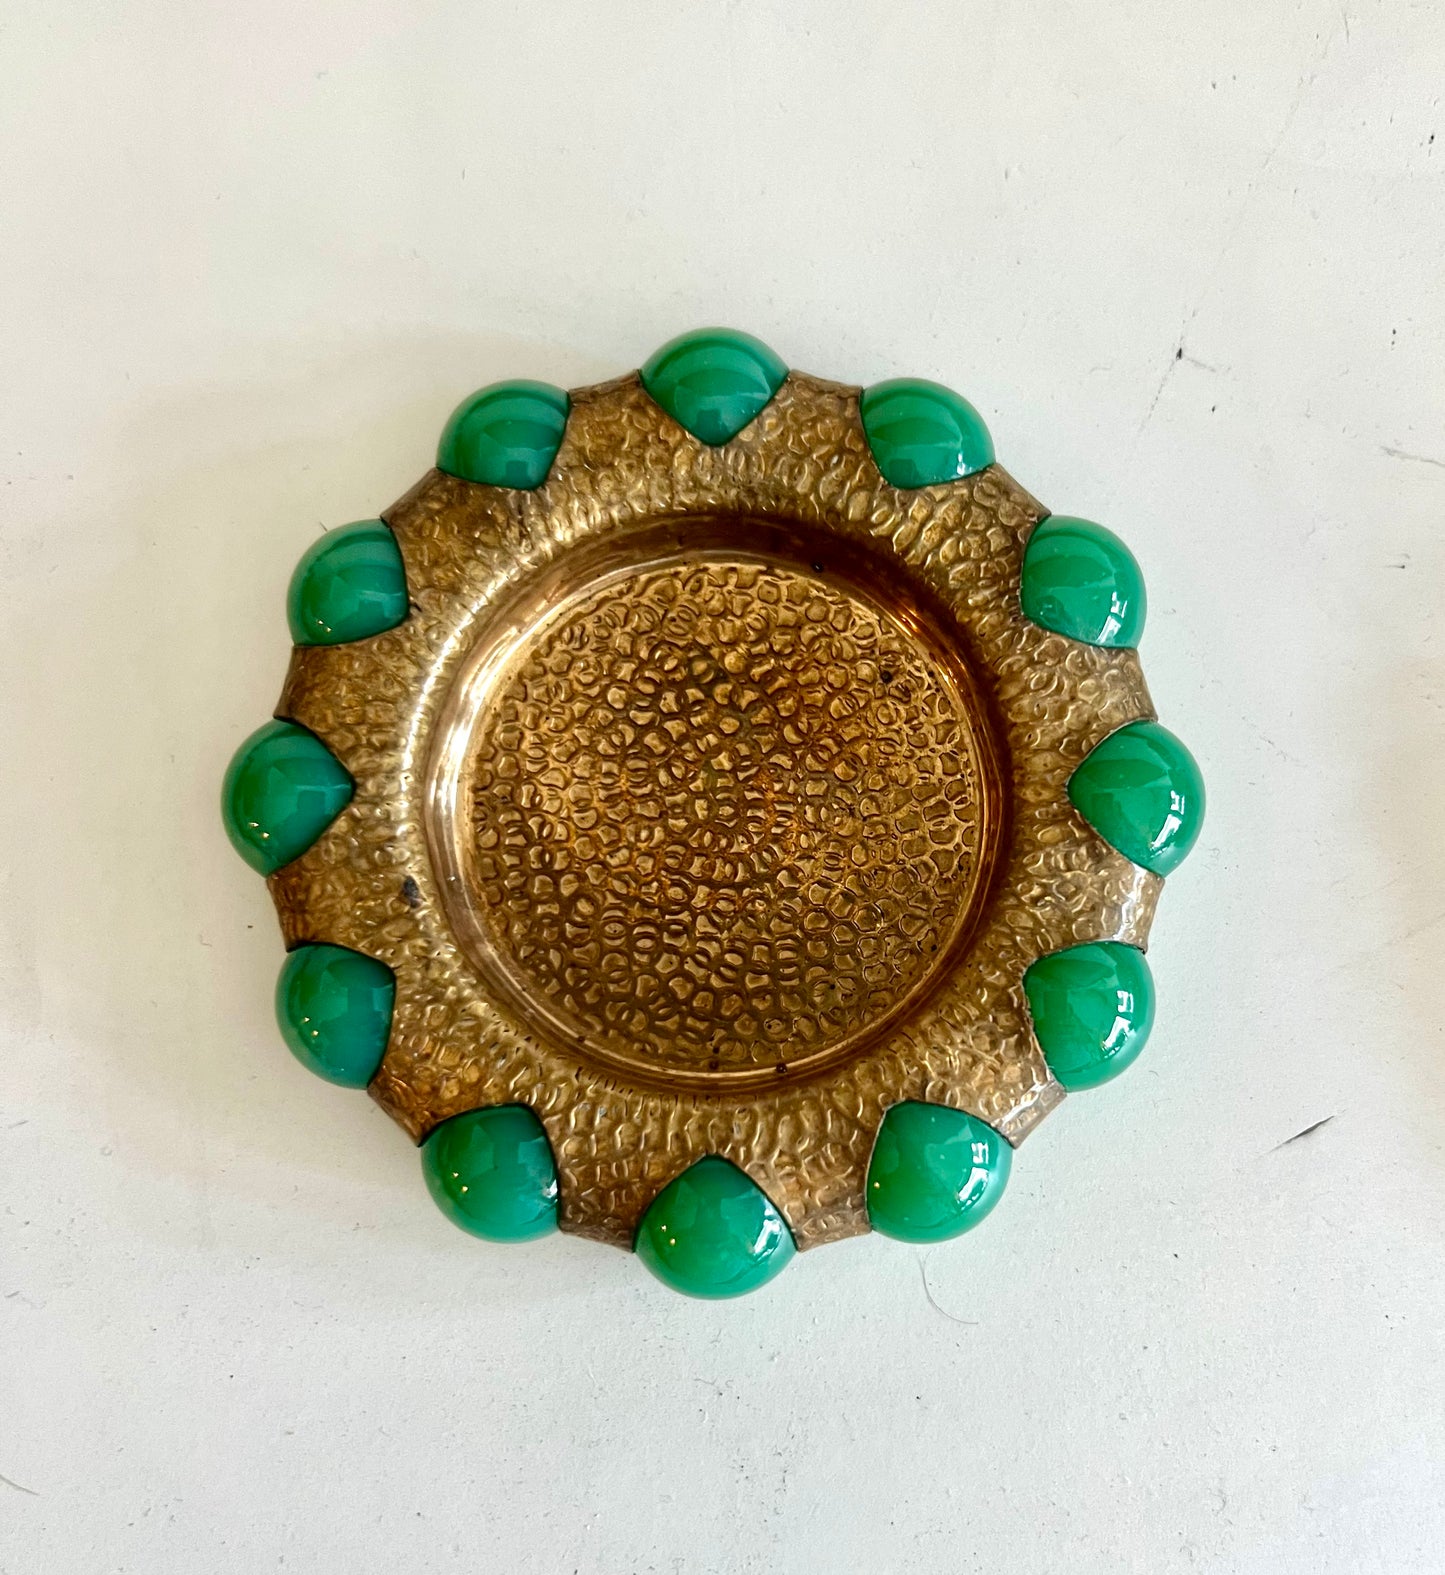 Vintage brass and green beaded jewelry and trinket tray